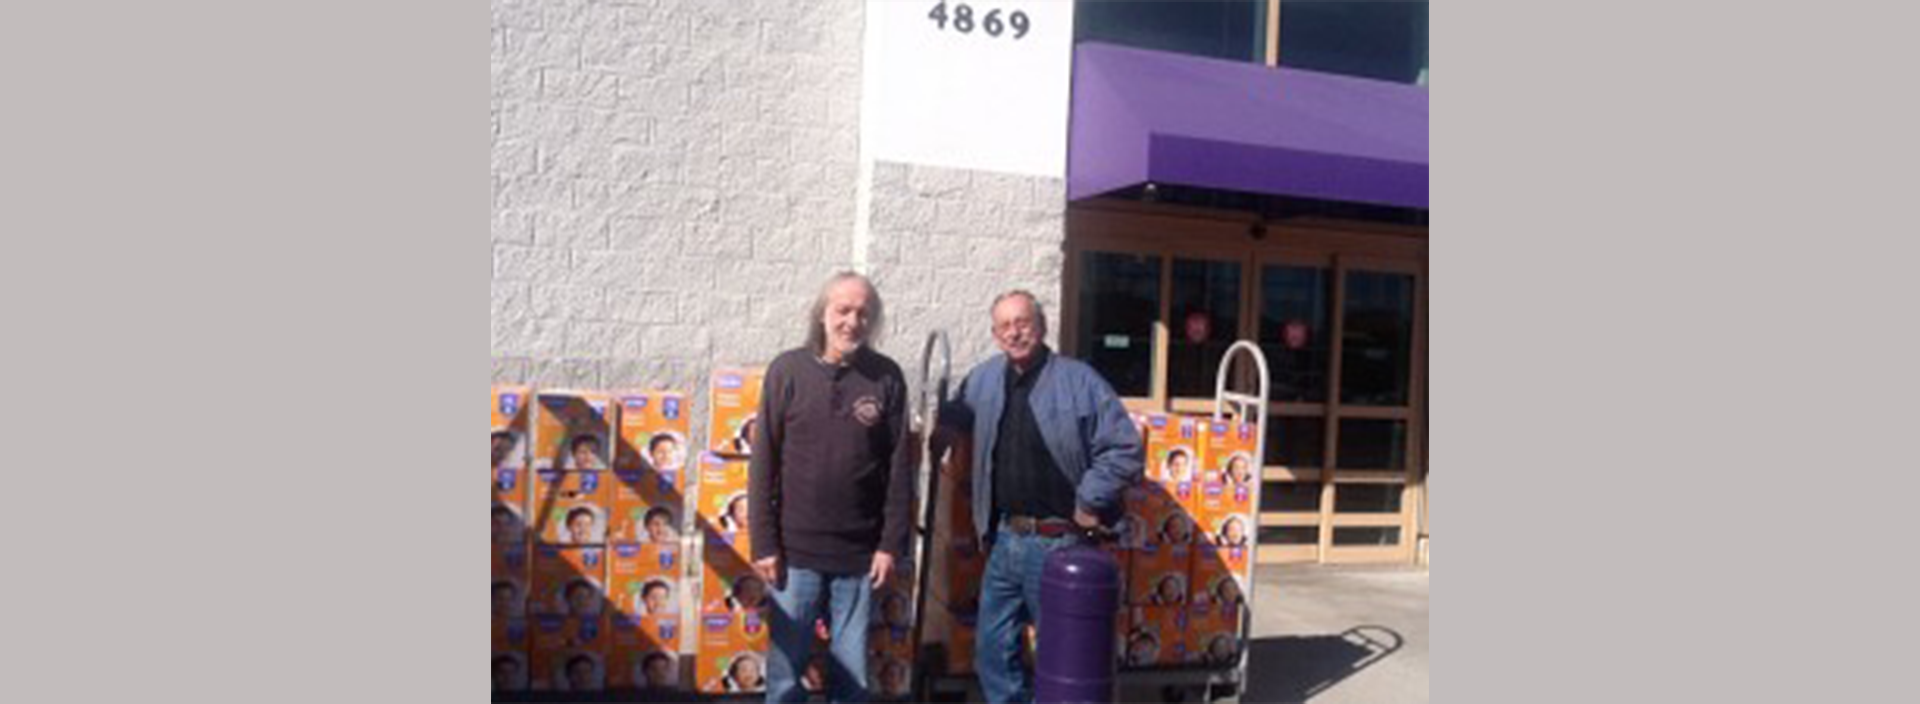 More Than 10,000 Diapers Donated to Women and Children’s Center of the Sierra